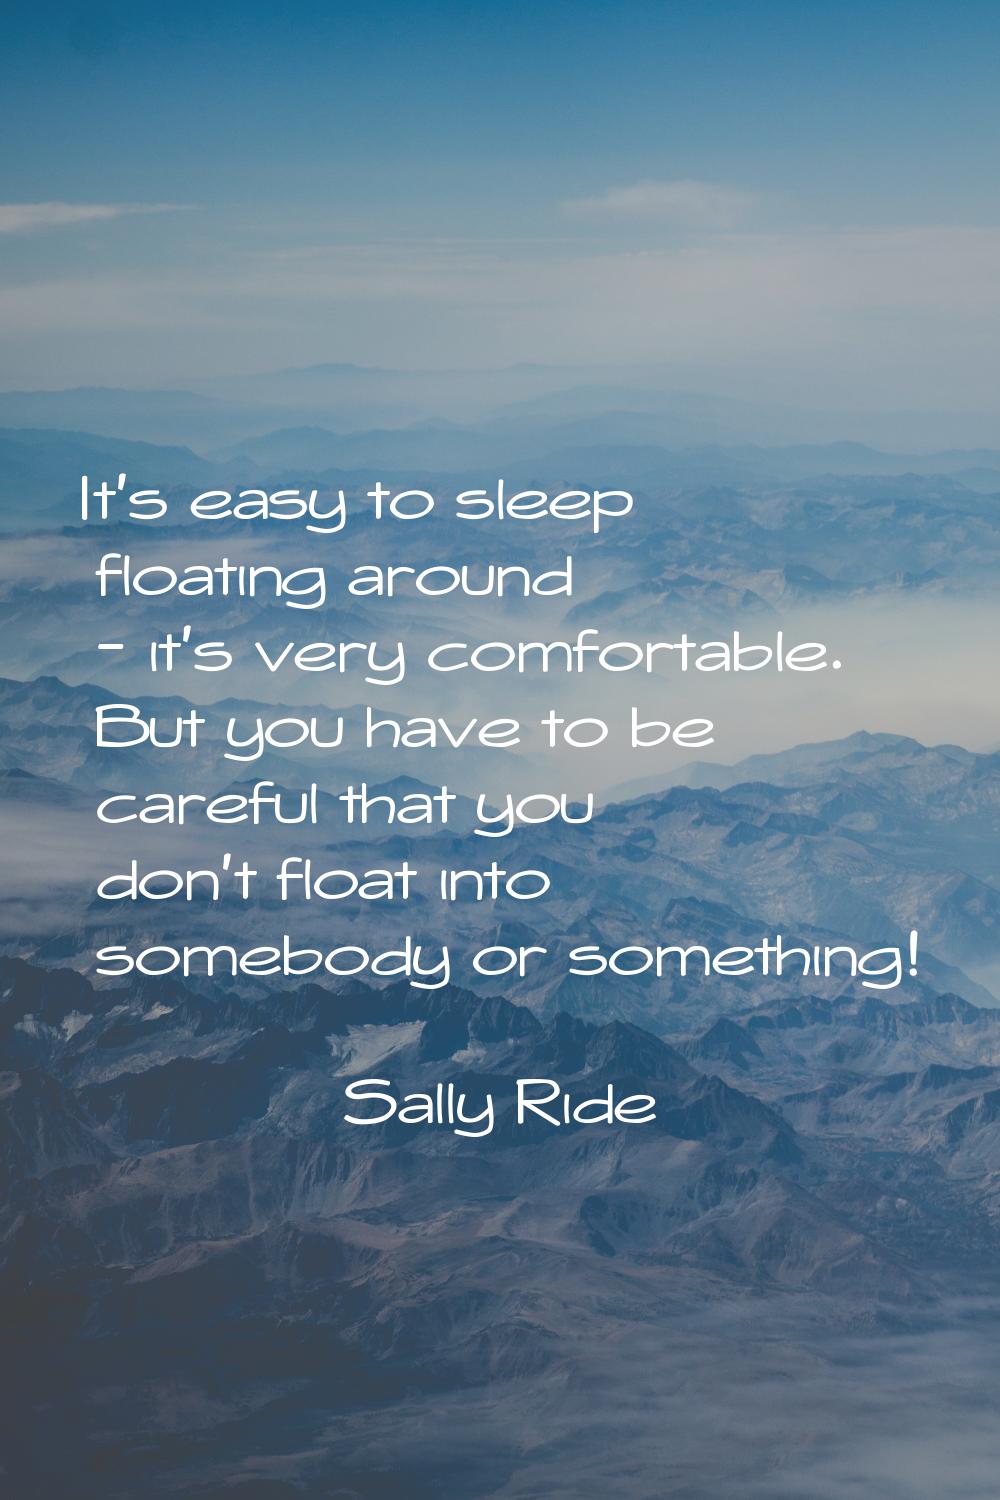 It's easy to sleep floating around - it's very comfortable. But you have to be careful that you don